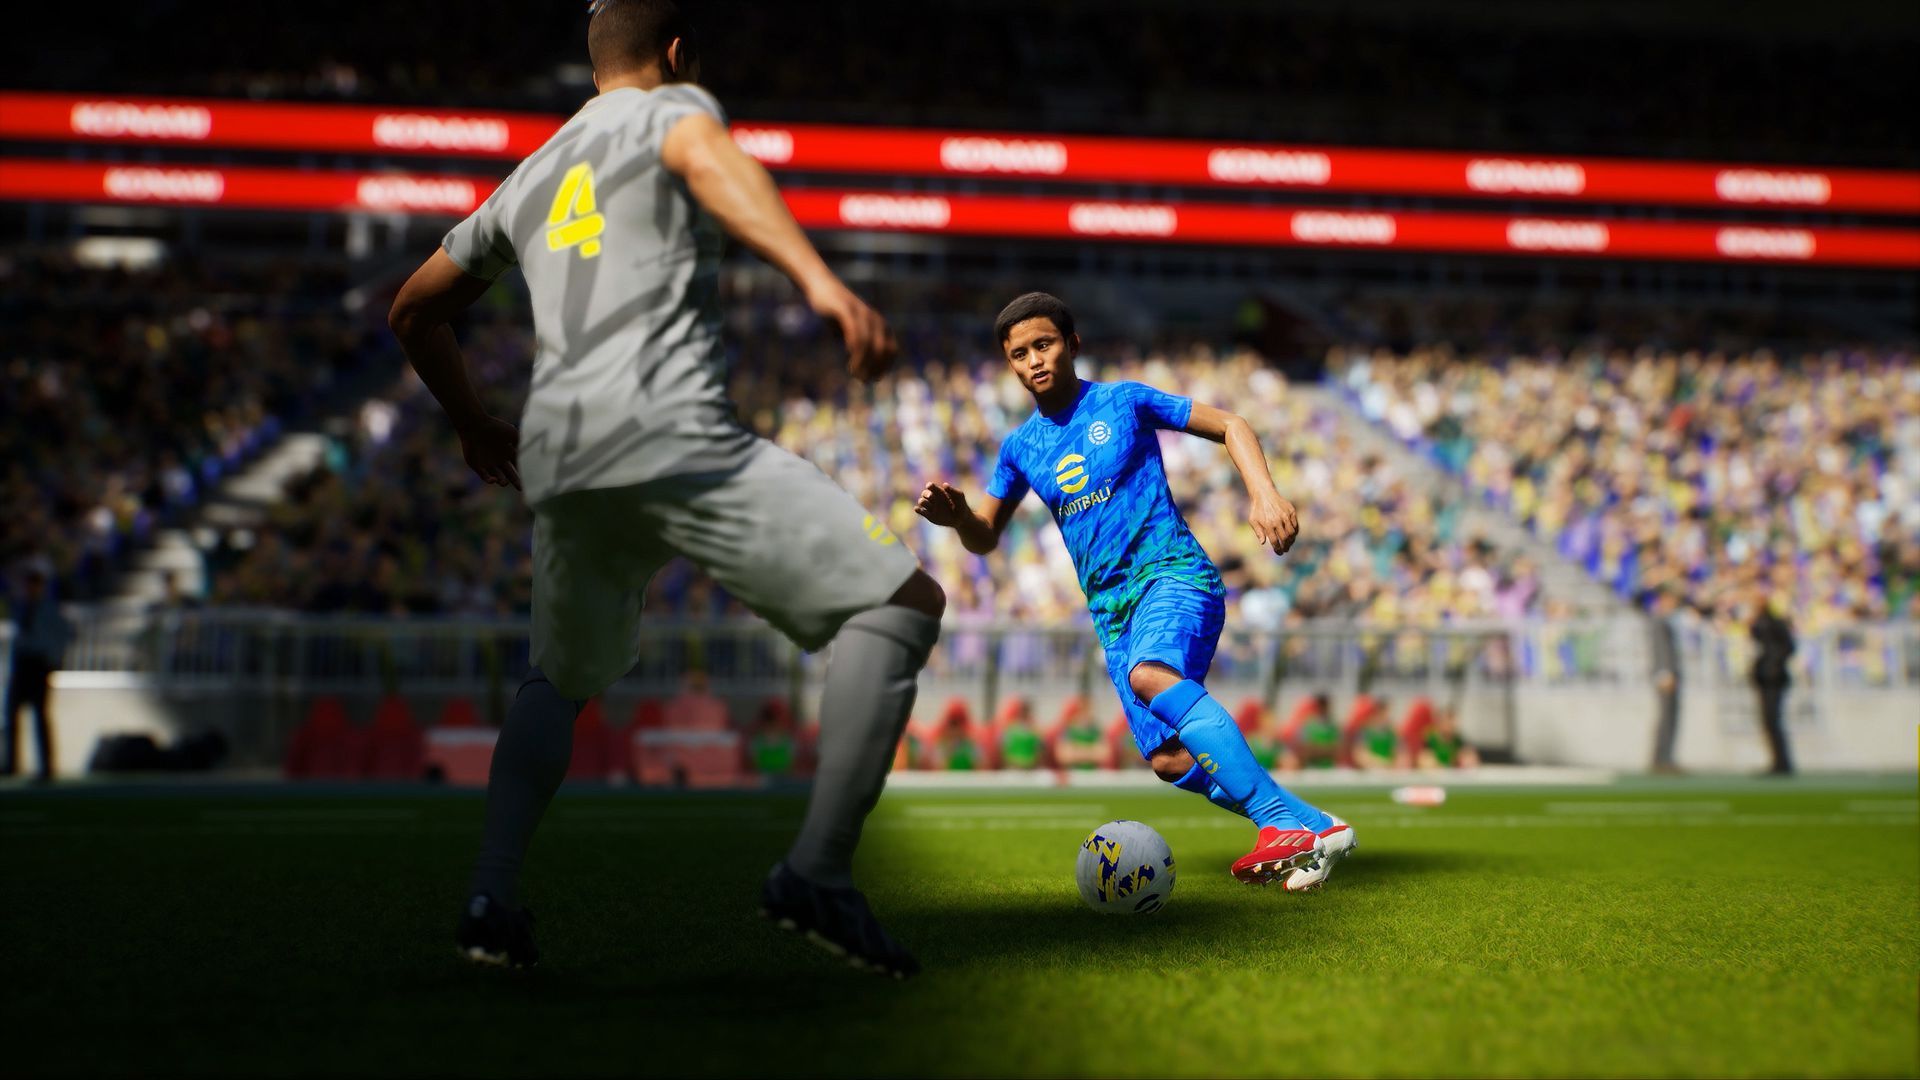 Screenshot of a scene from the video game eFootball 22, which shows one soccer playing in a blue uniform dribbling the ball as an opponent in grey approaches